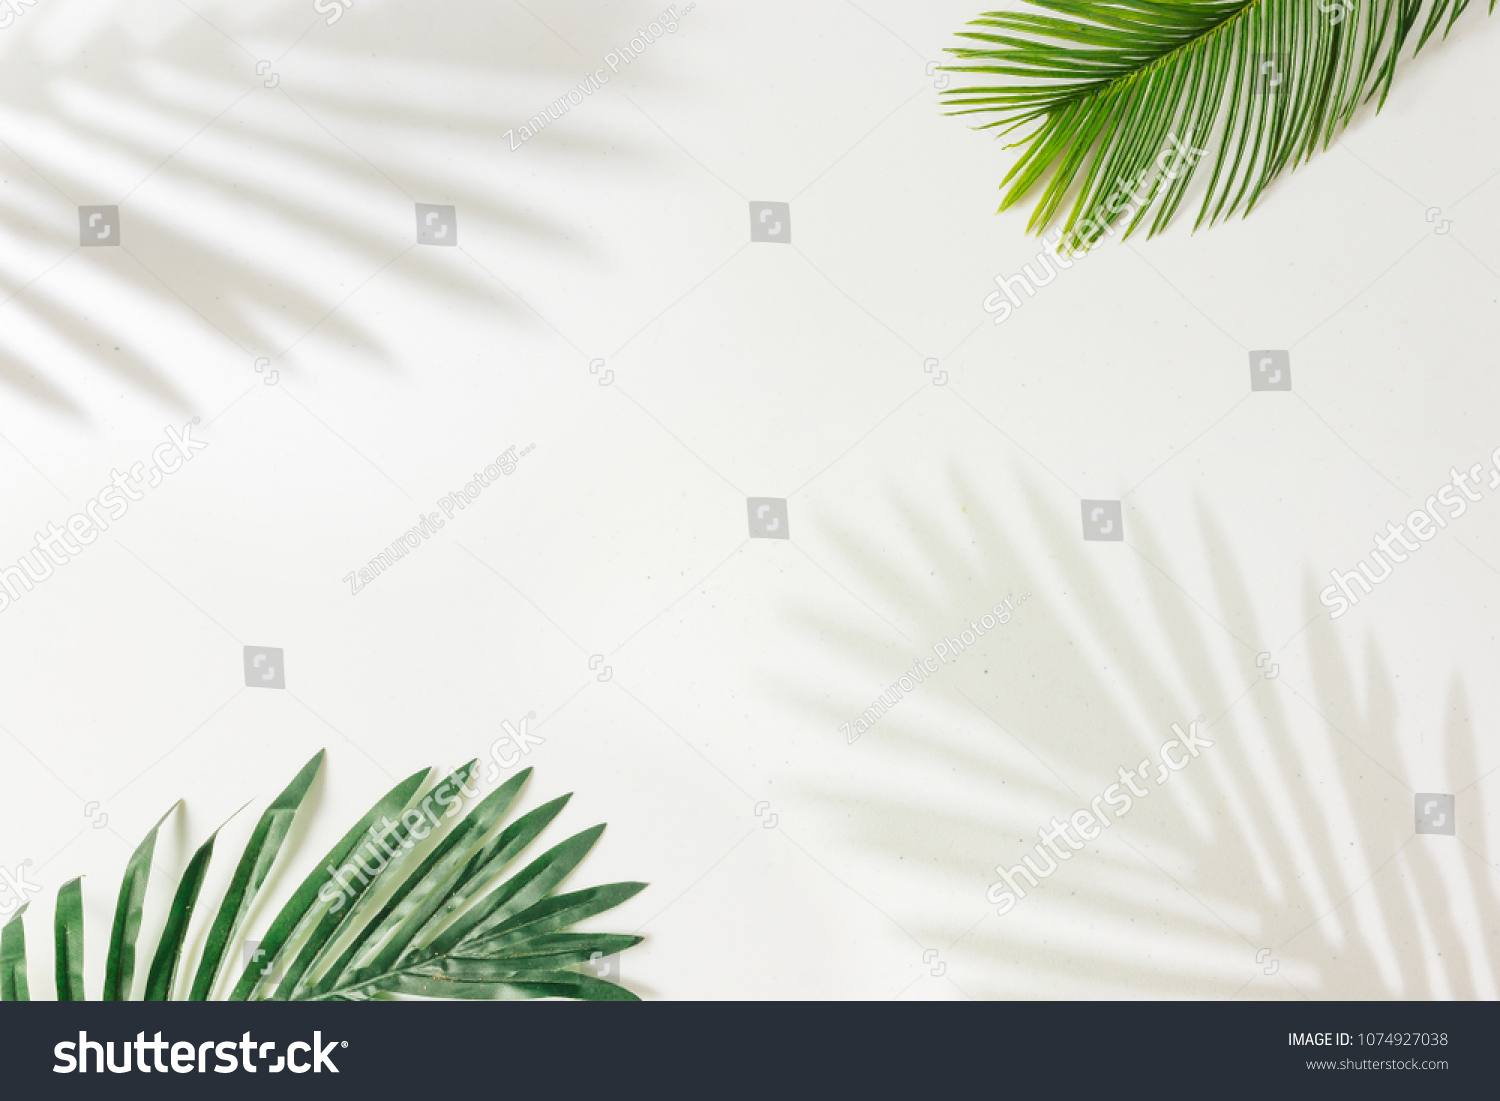 Creative layout made of colorful tropical leaves on white background. Minimal summer exotic concept with copy space. Border arrangement. #1074927038